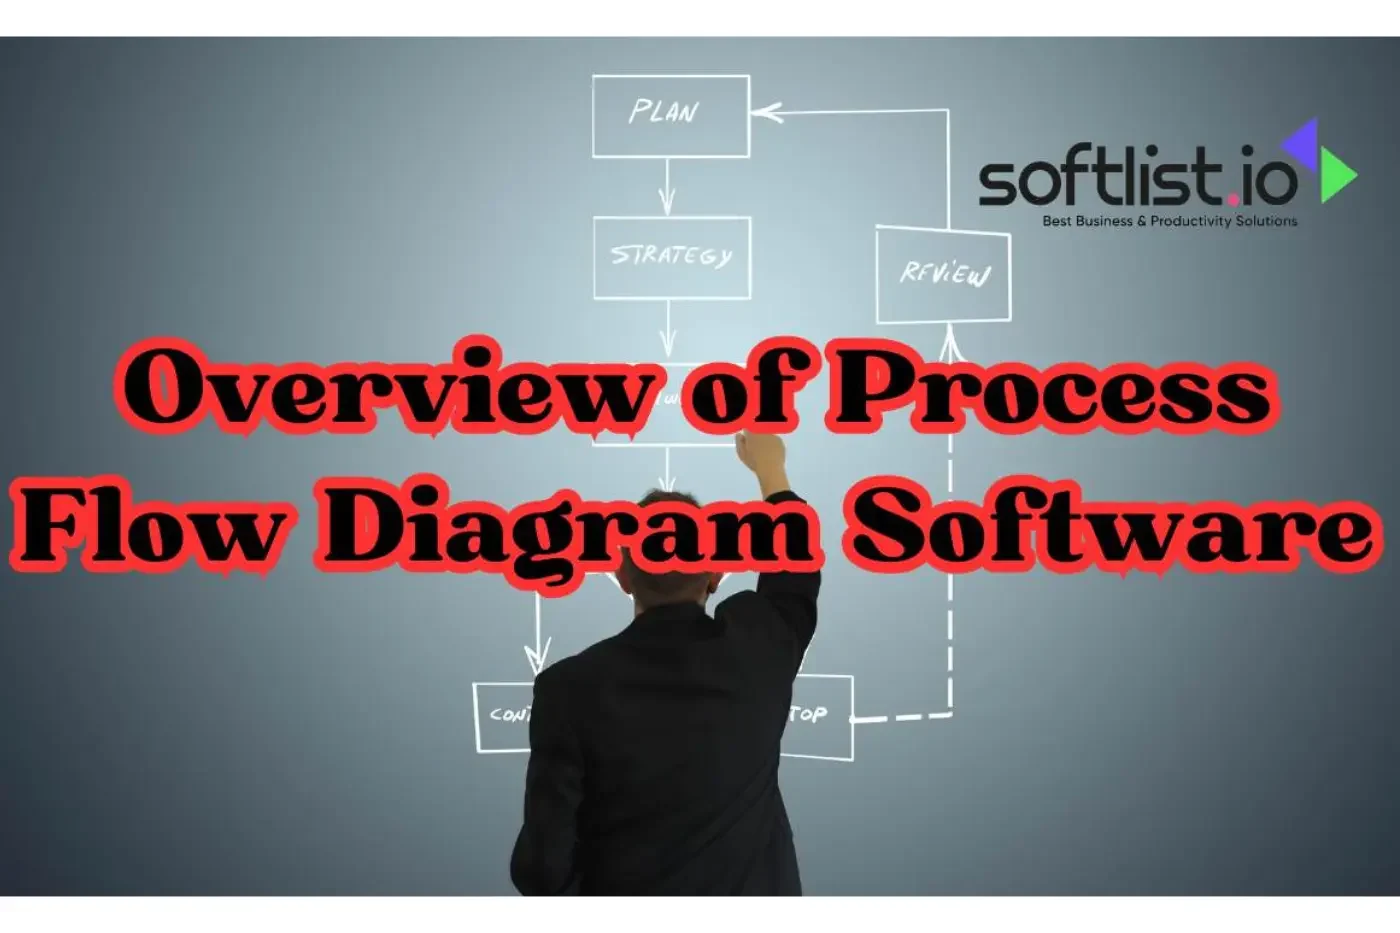 Overview of Process Flow Diagram Software